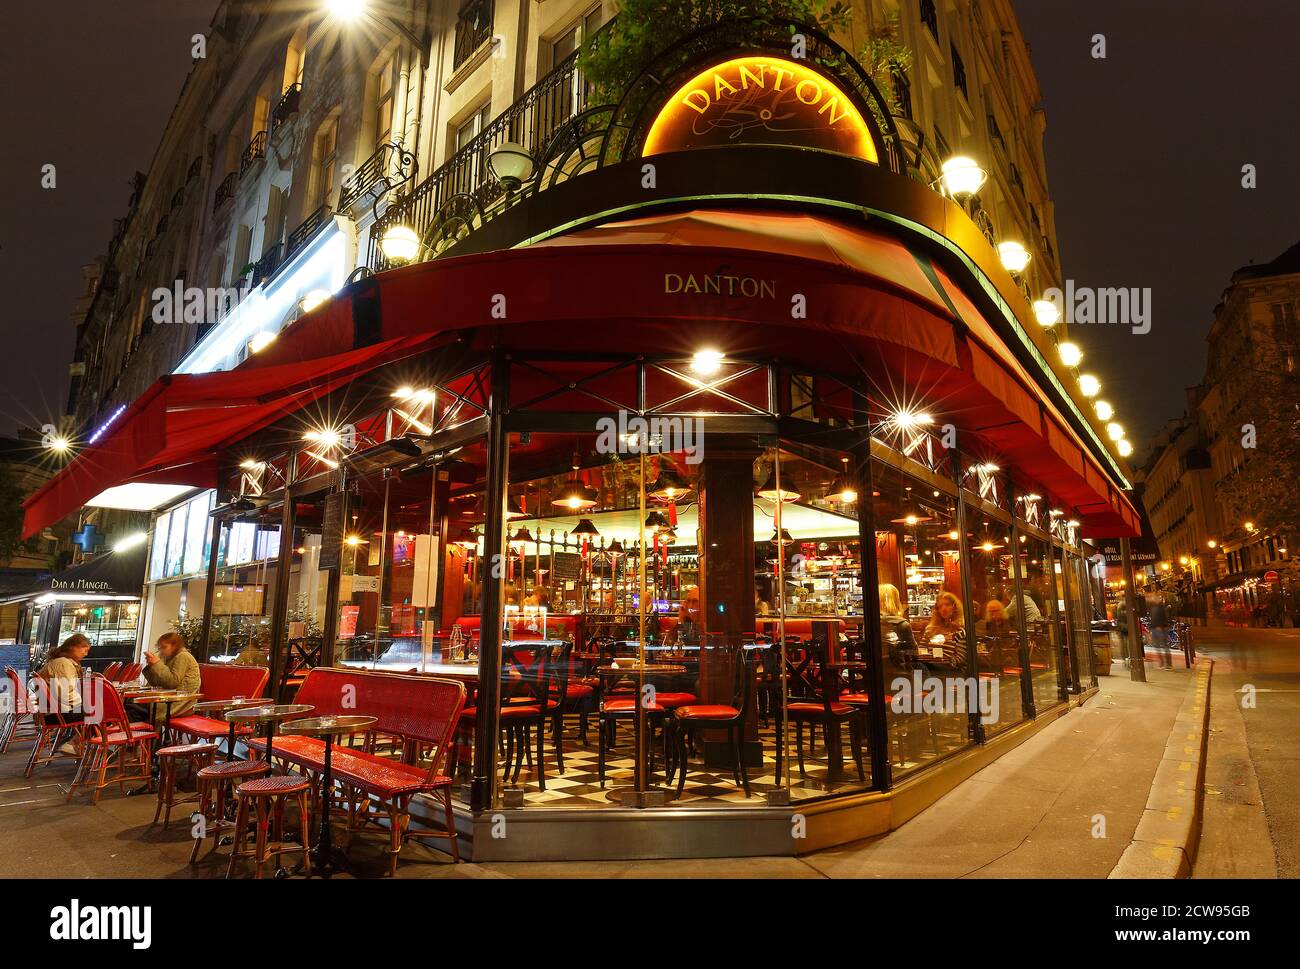 The traditional French cafe Danton located on Saint-Germain boulevard ...